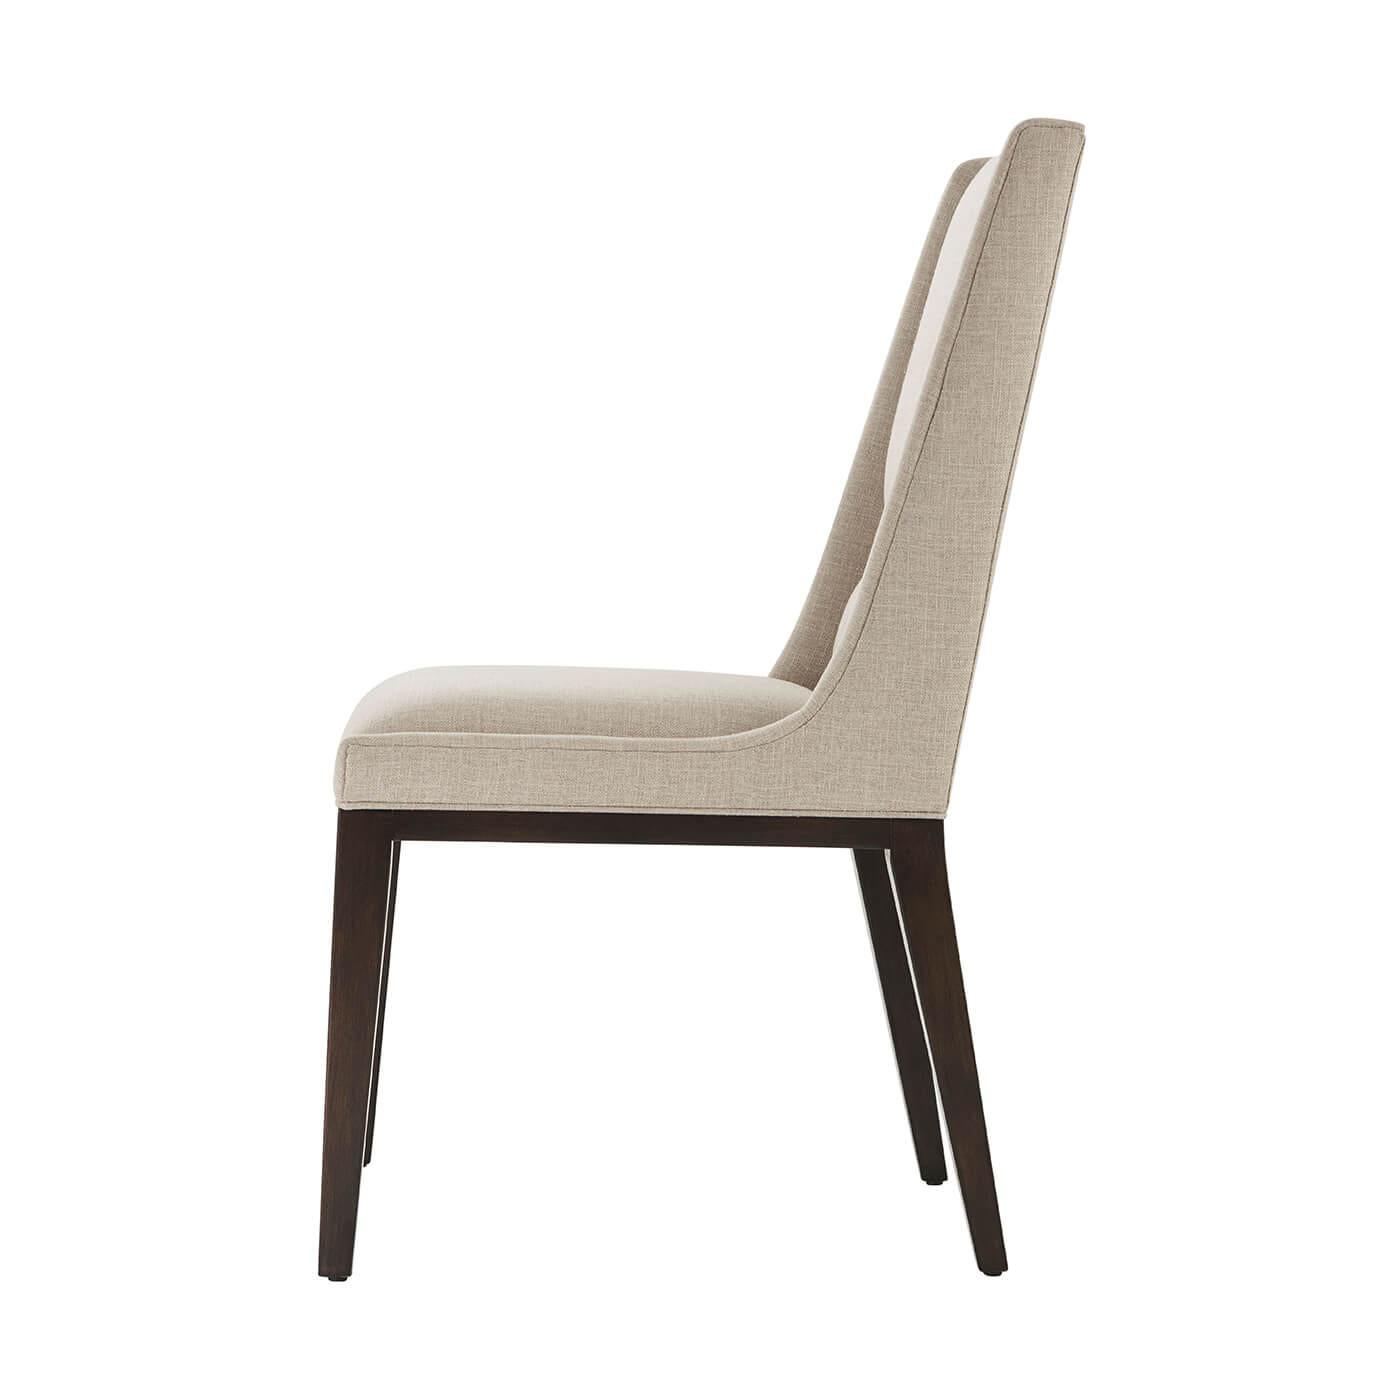 A mid century style upholstered square back dining chair in our Ossian finish, with a panel upholstered backrest and tight upholstered cushion seat and raised on square tapered legs.

The upholstery is a treated performance fabric to protect from